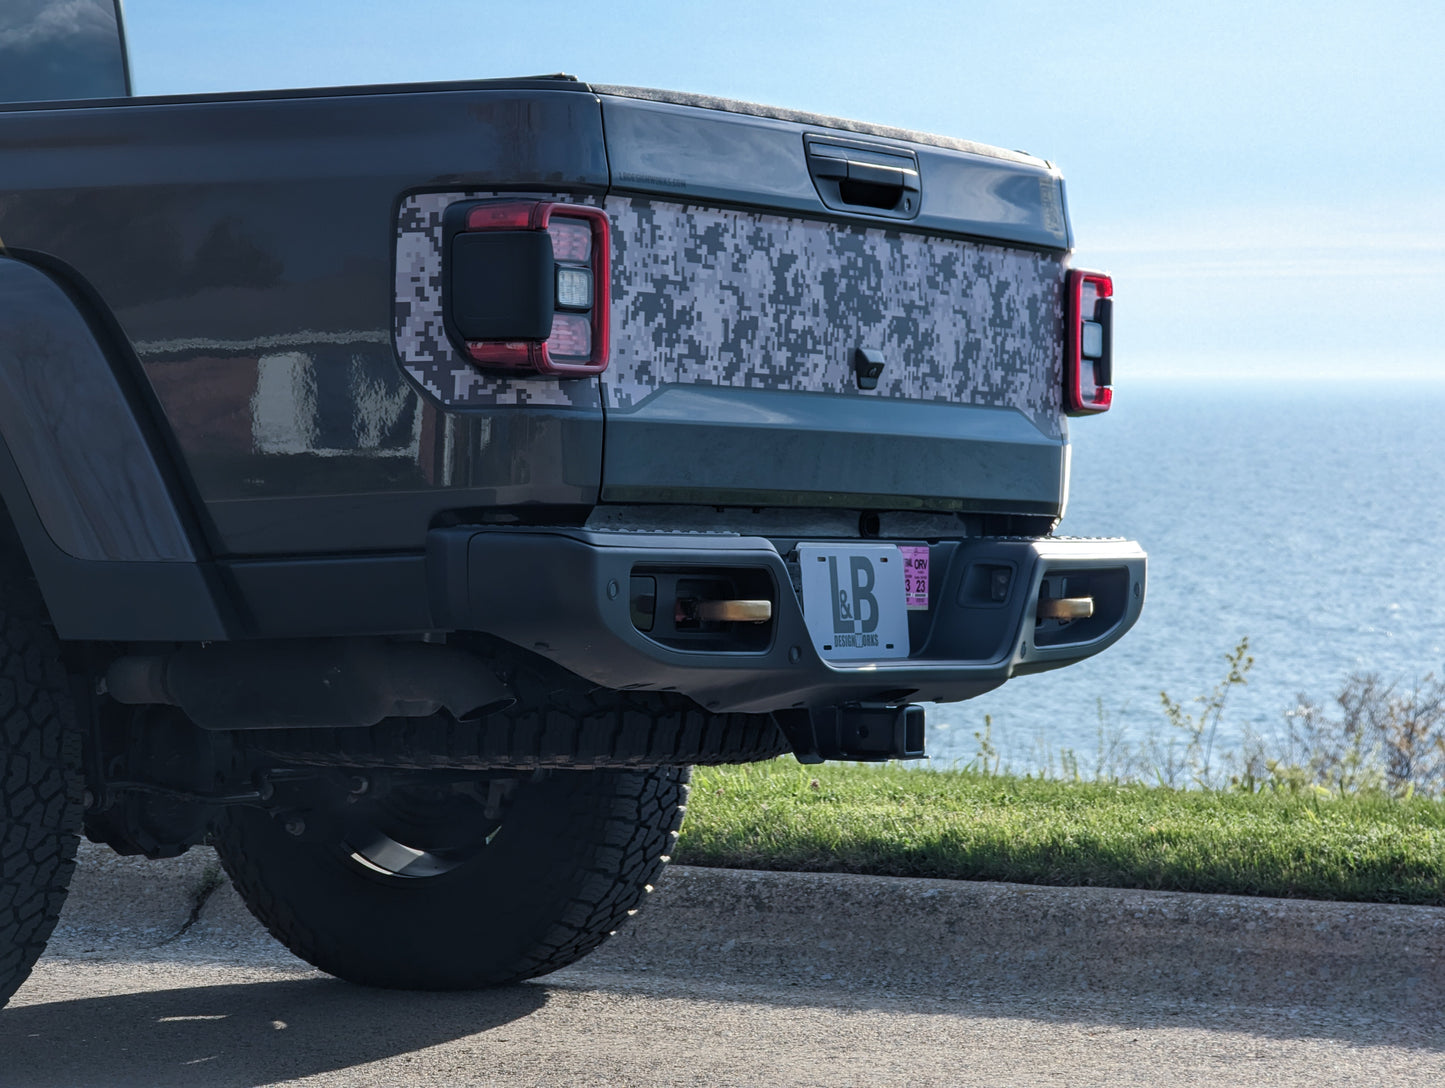 Digital Camouflage Printed Blackout Arched Tailgate Color Line Rubicon Mojave decal set- fits 2020 and newer Jeep Gladiator